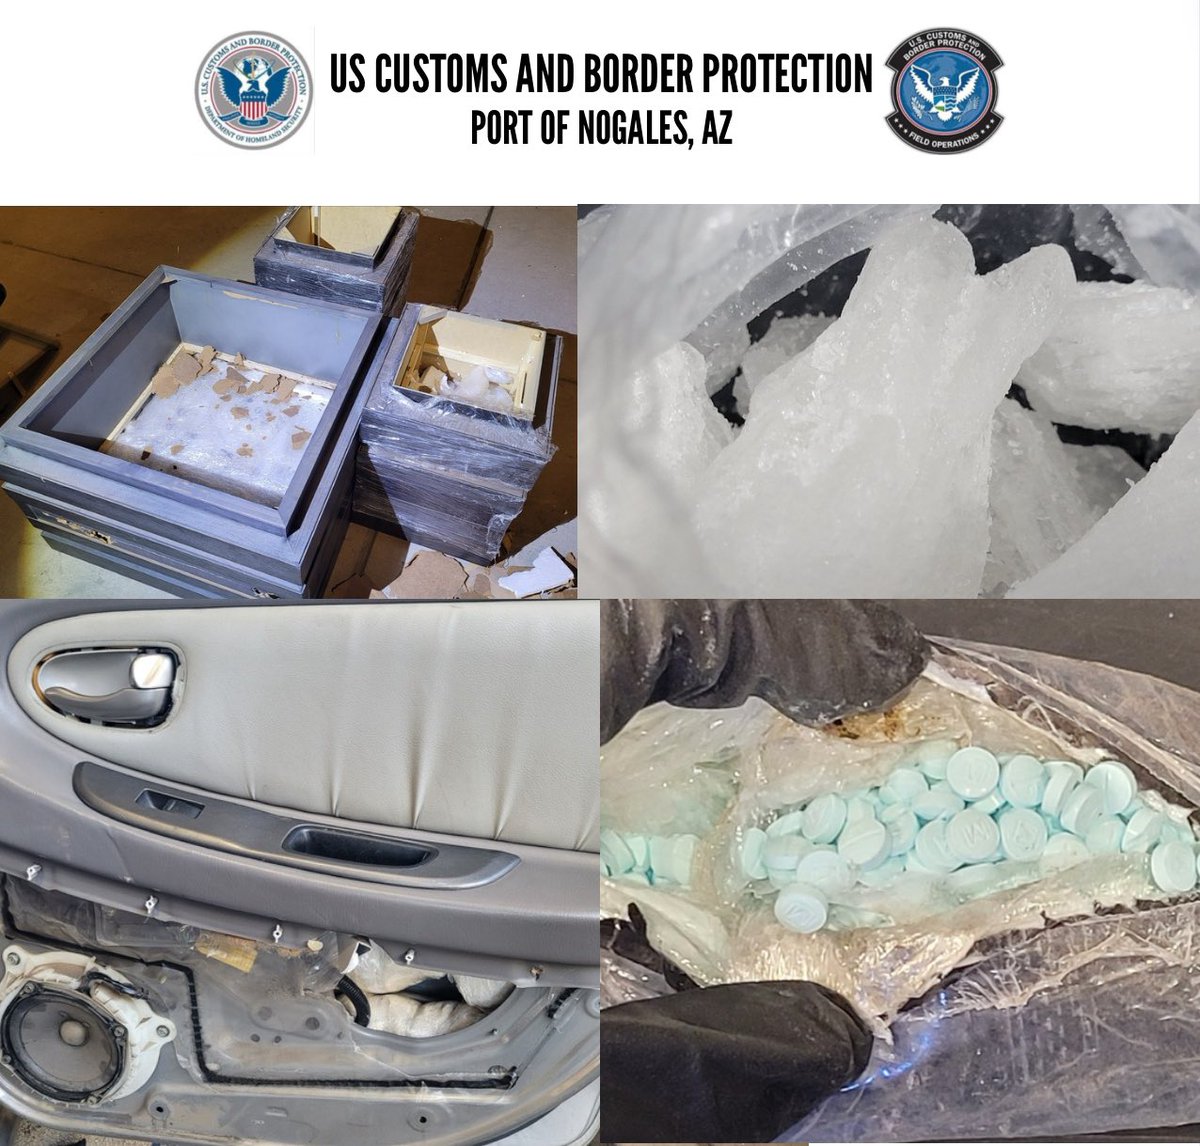 4/9: CBP officers at the Nogales POE seized approximately 117,675 fentanyl pills and 19.15 pounds meth in doors and panels of a vehicle 4/11: Officers discovered 100 pounds meth hidden in new furniture Both drivers were taken into custody and will be detained for prosecution.